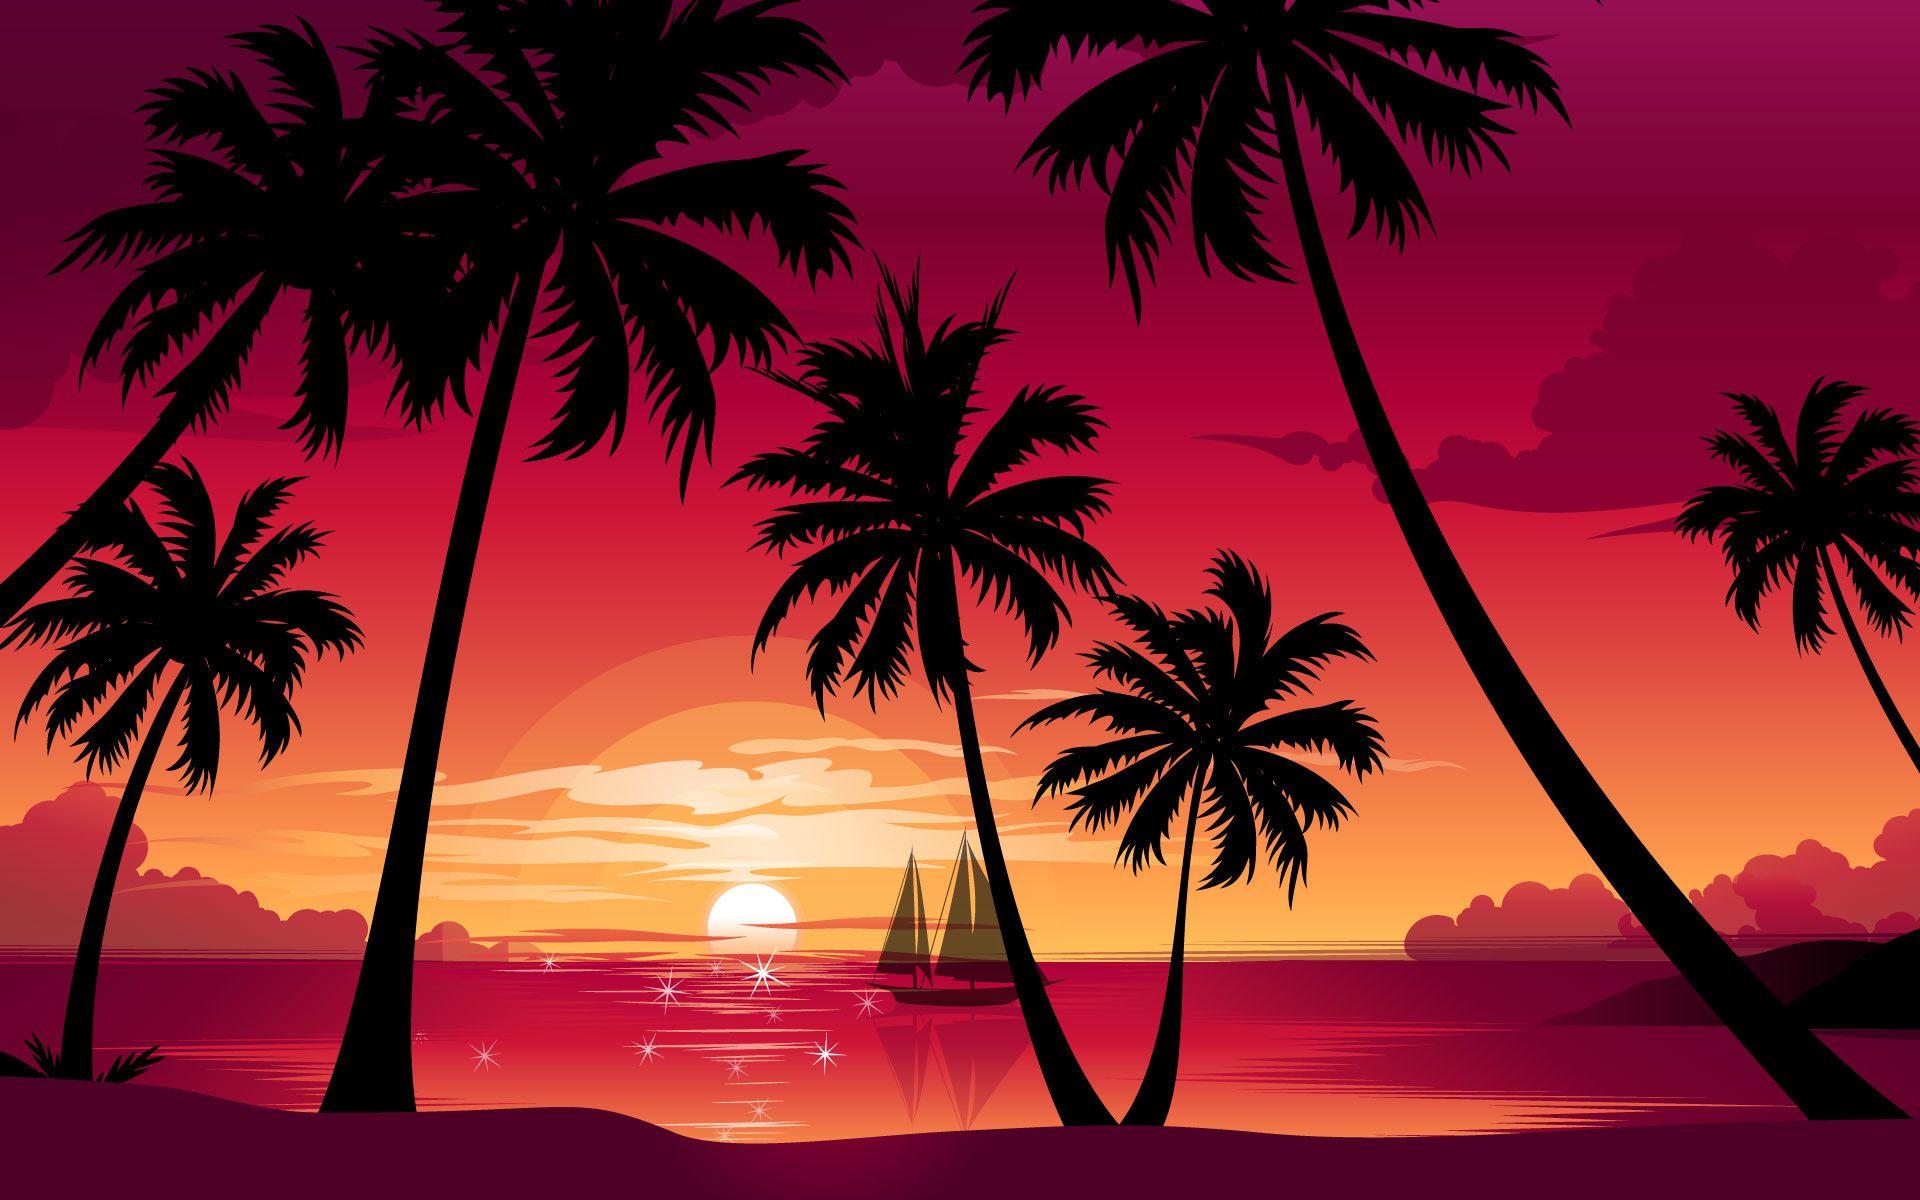 Tropical Beach Sunset Wallpapers Top Free Tropical Beach Sunset Backgrounds Wallpaperaccess 8783